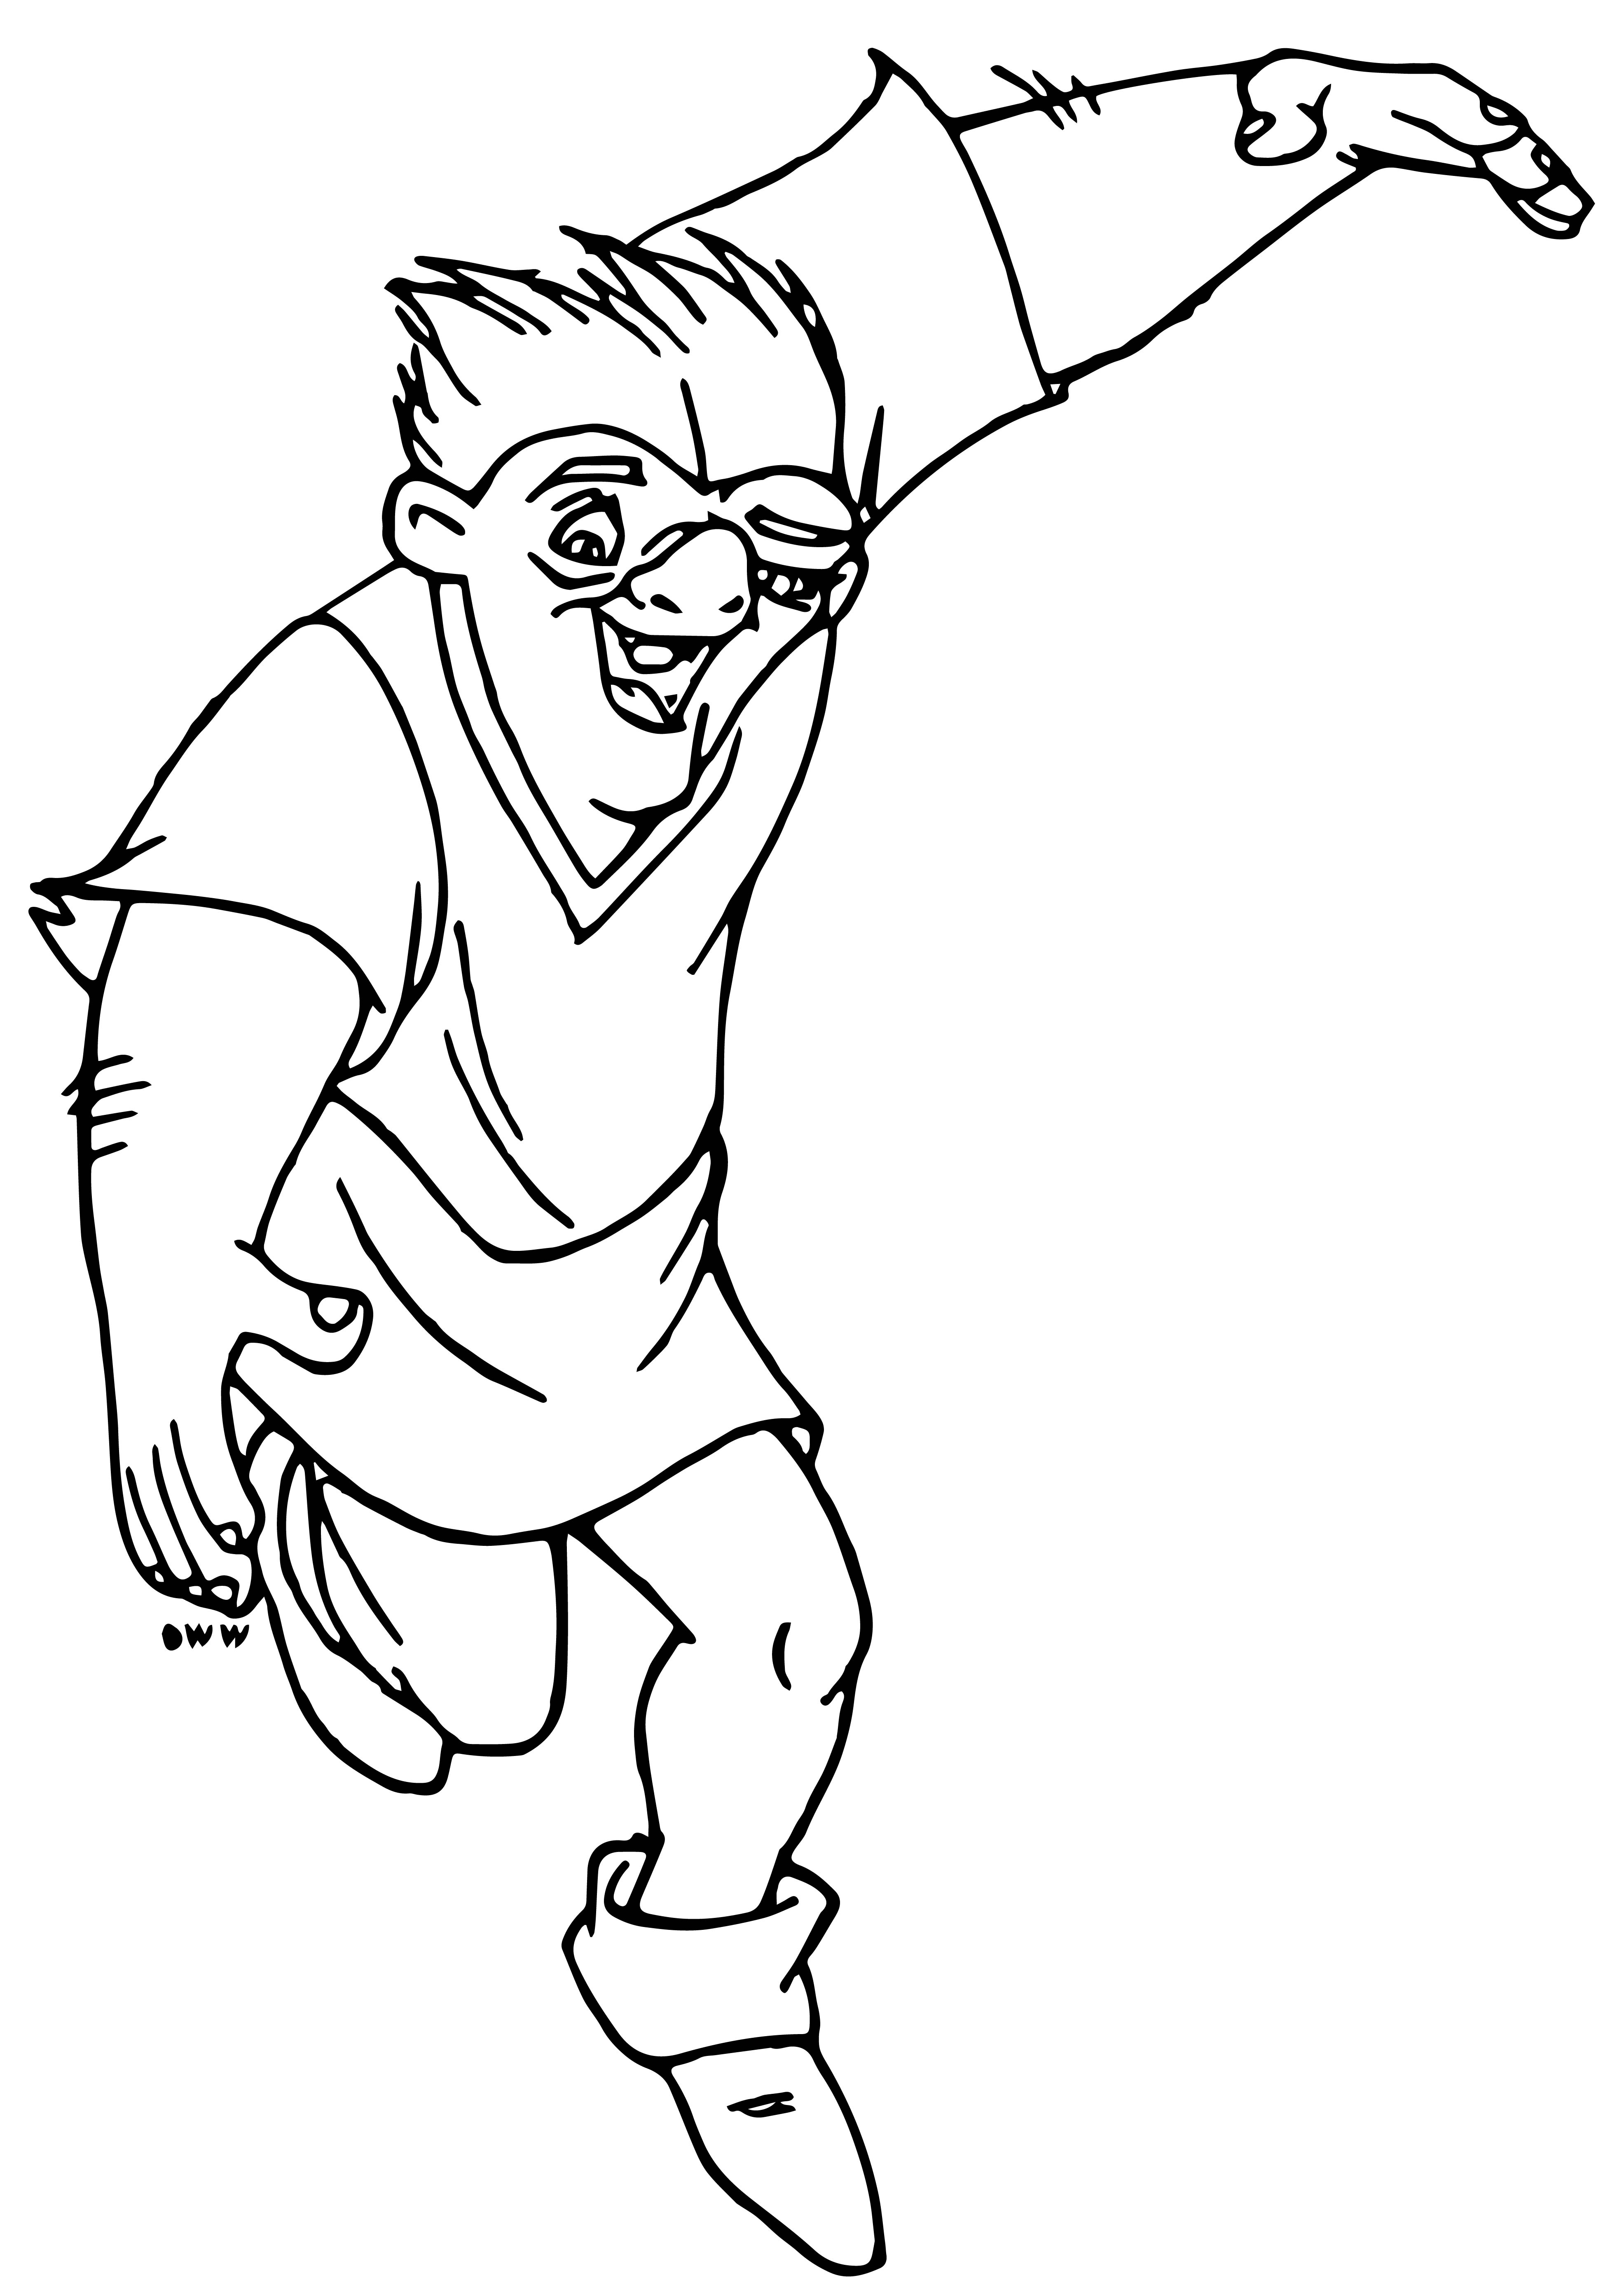 The Hunchback Of Notre Dame Mira22 Cartoon Coloring Pages ...